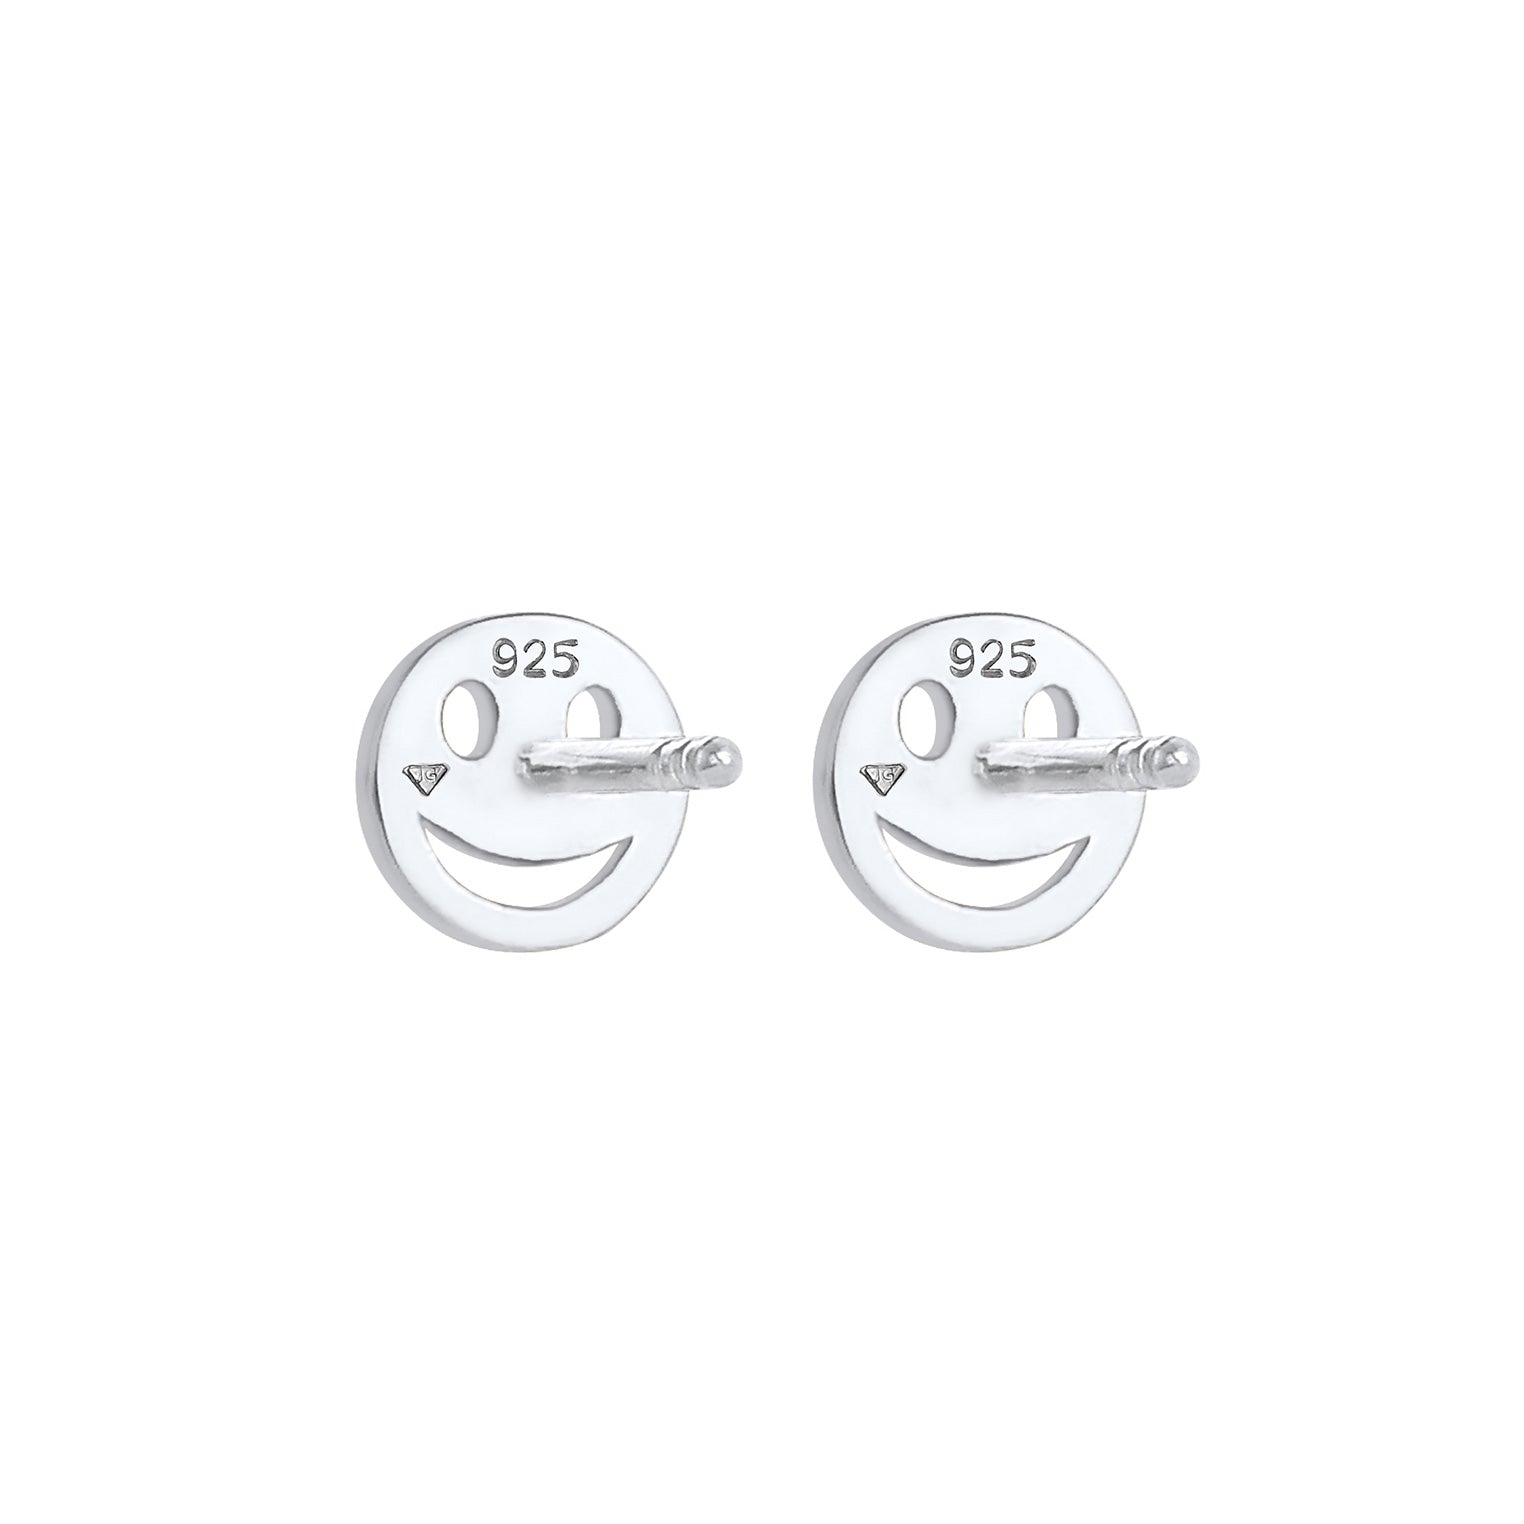 mit Jewelry – Elli Face Smiling Ohrring